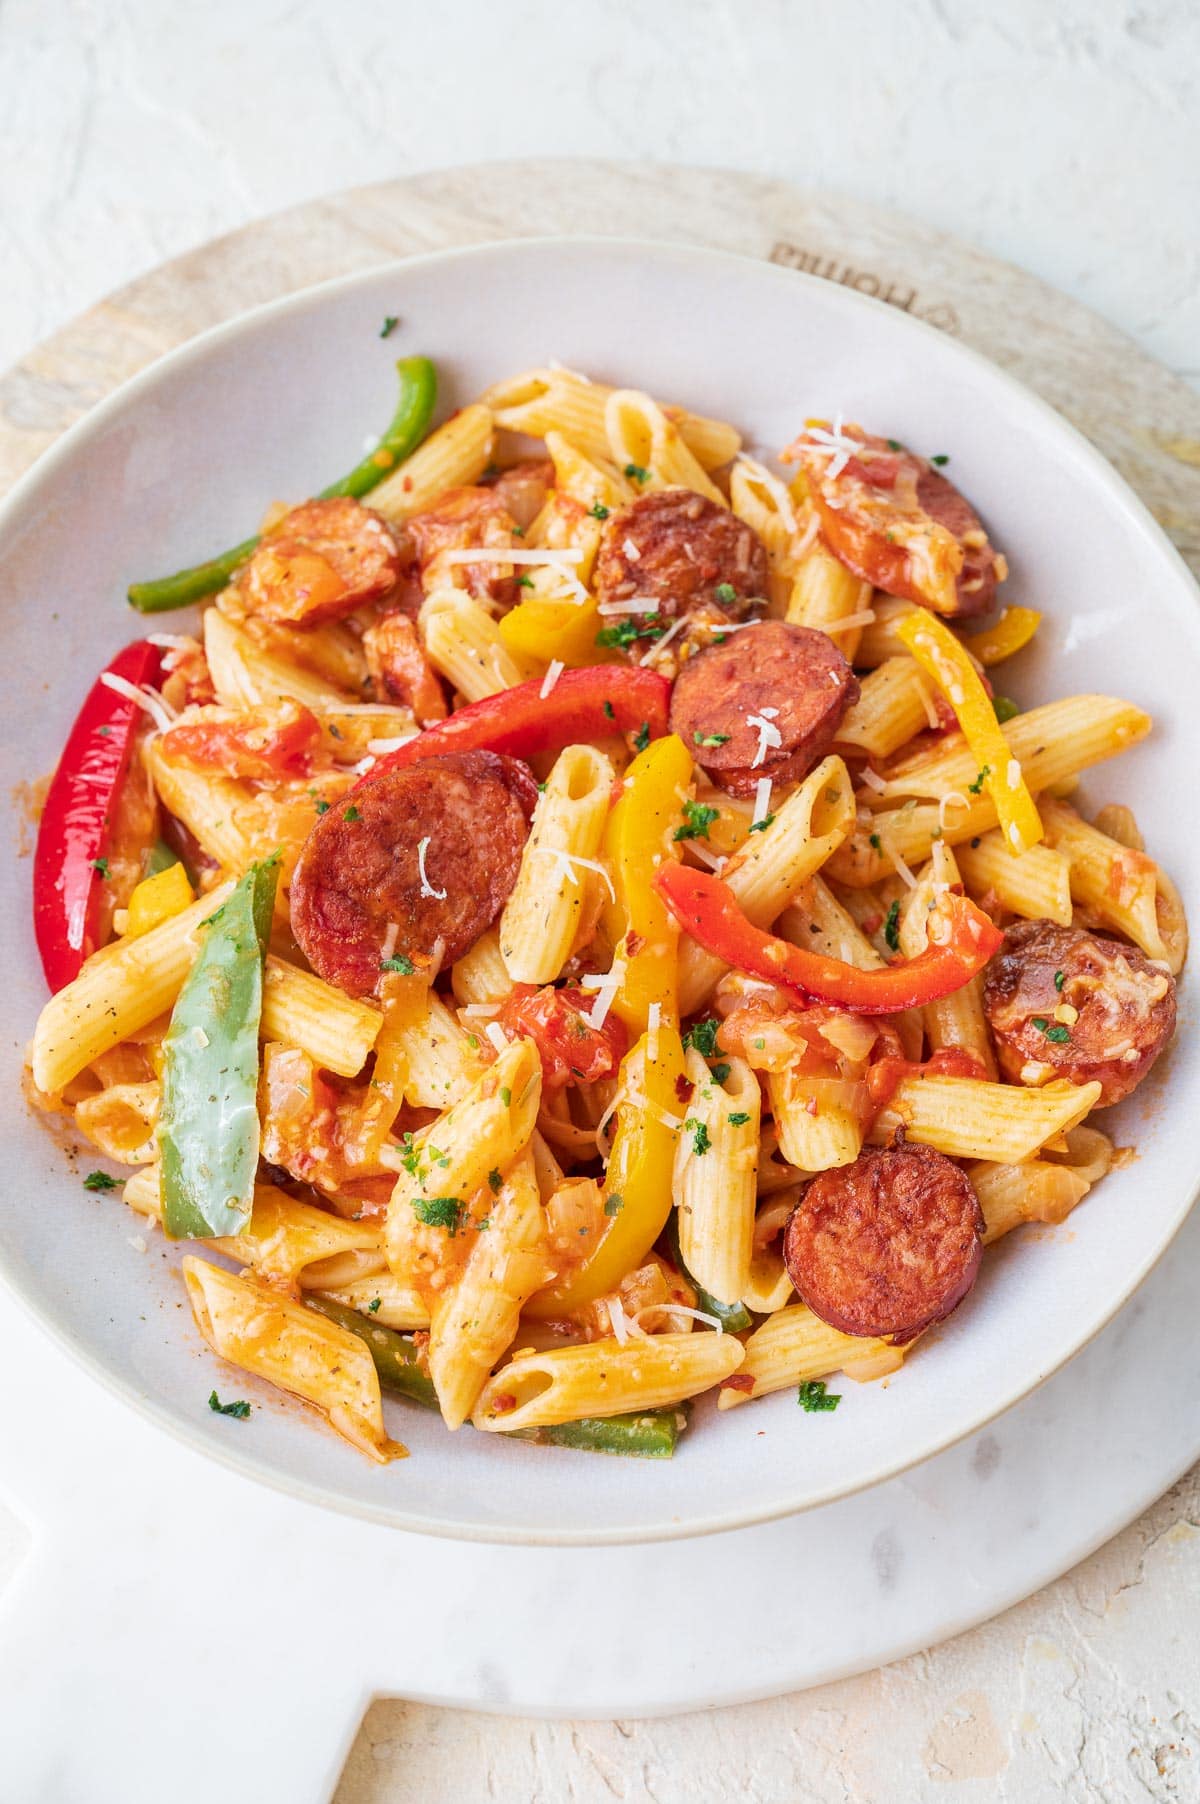 Pasta with sausage and bell peppers in a white bowl.